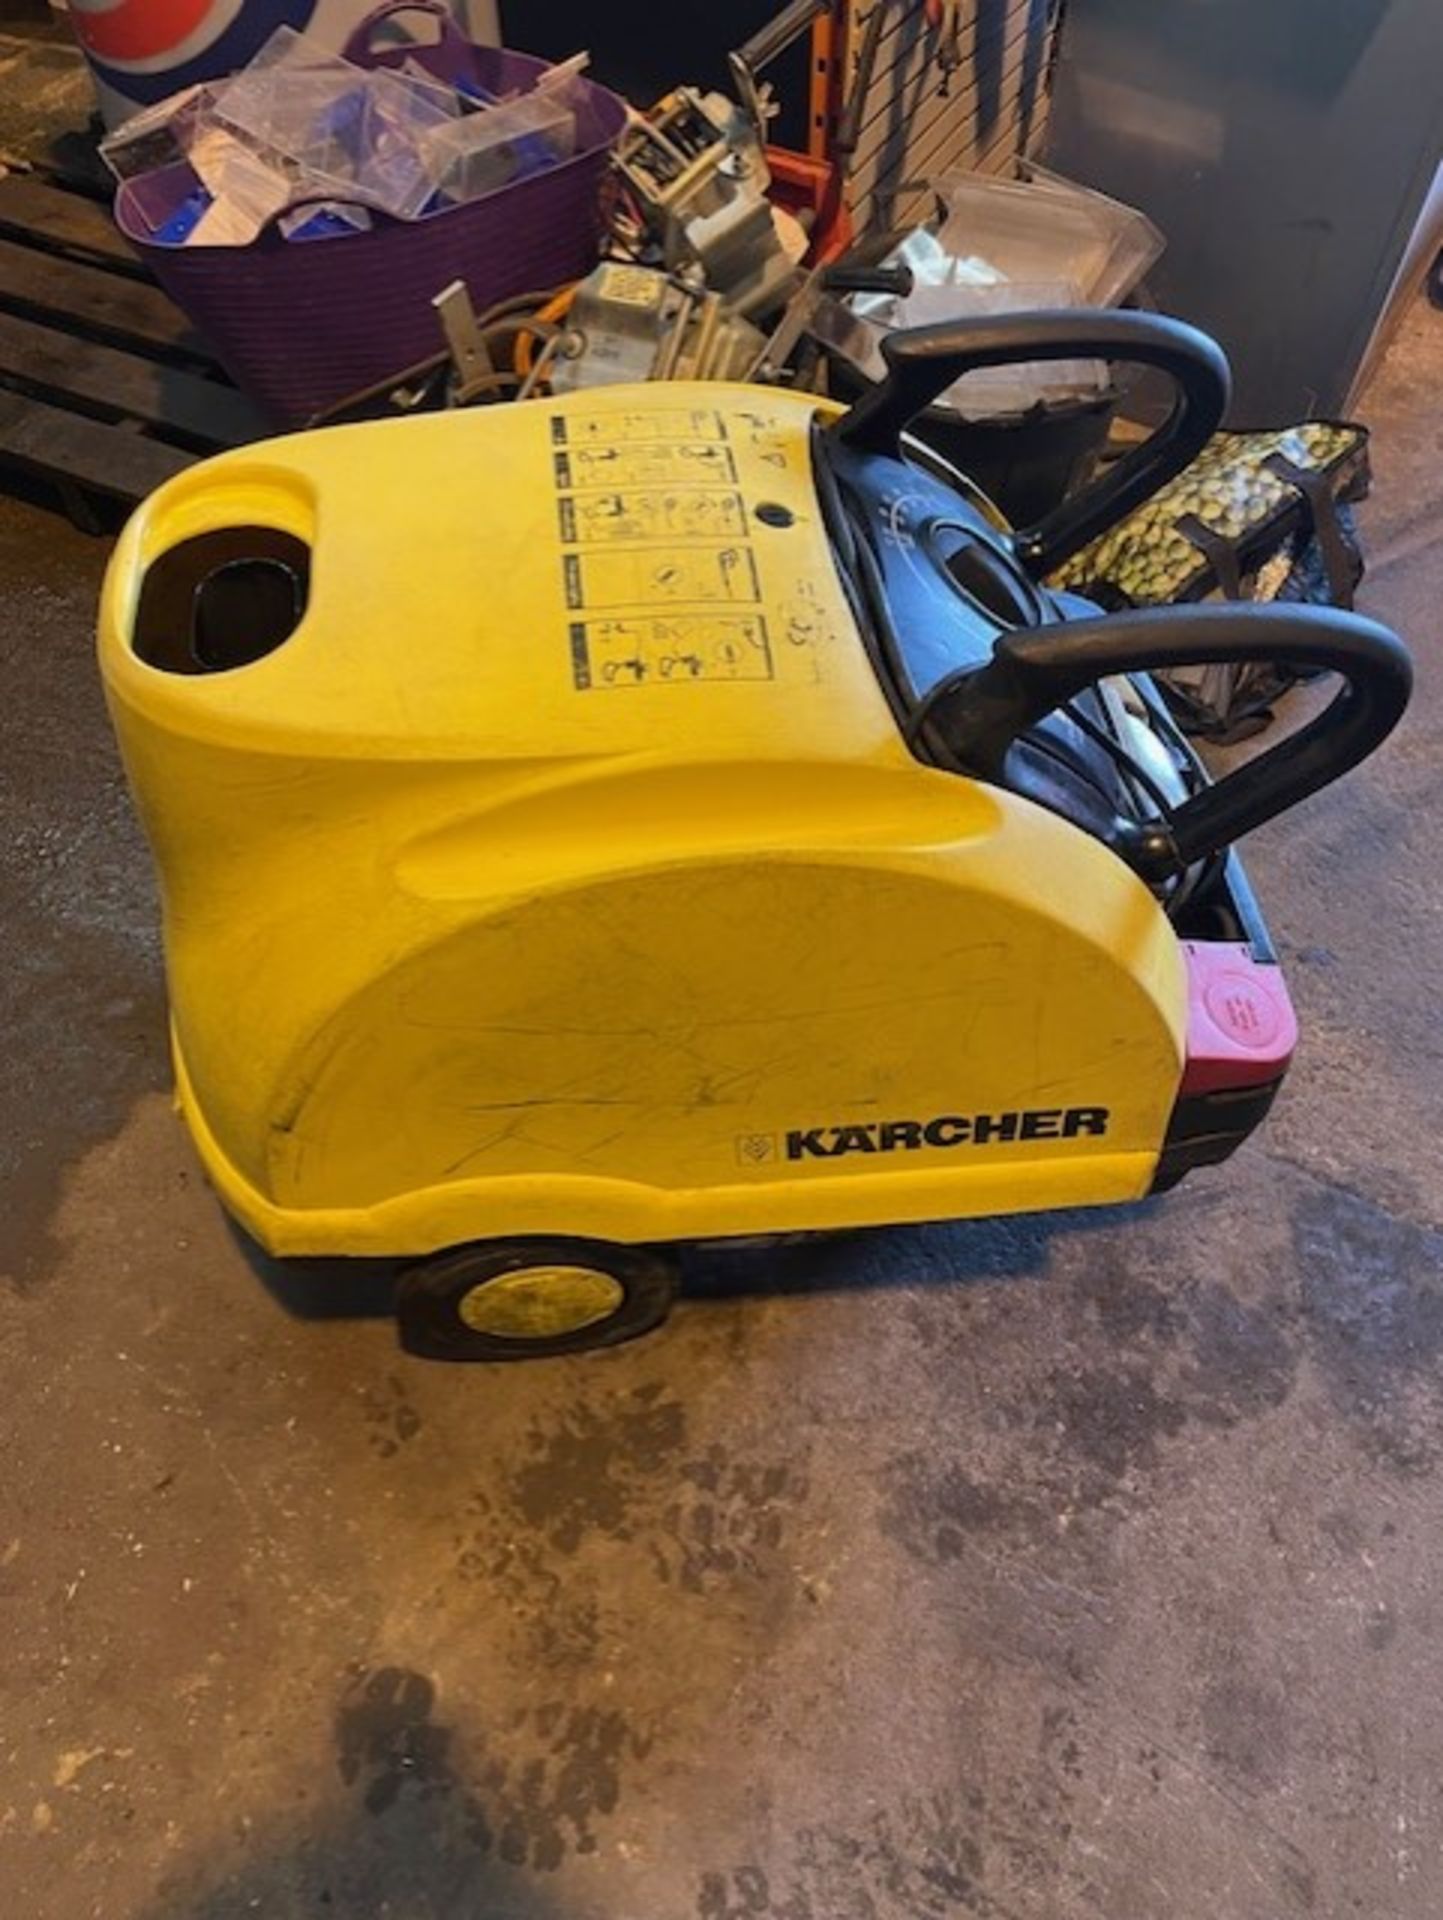 Karcher hot and cold pressure washer hds551 c model it’s in good condition still comes with hose and - Image 4 of 10